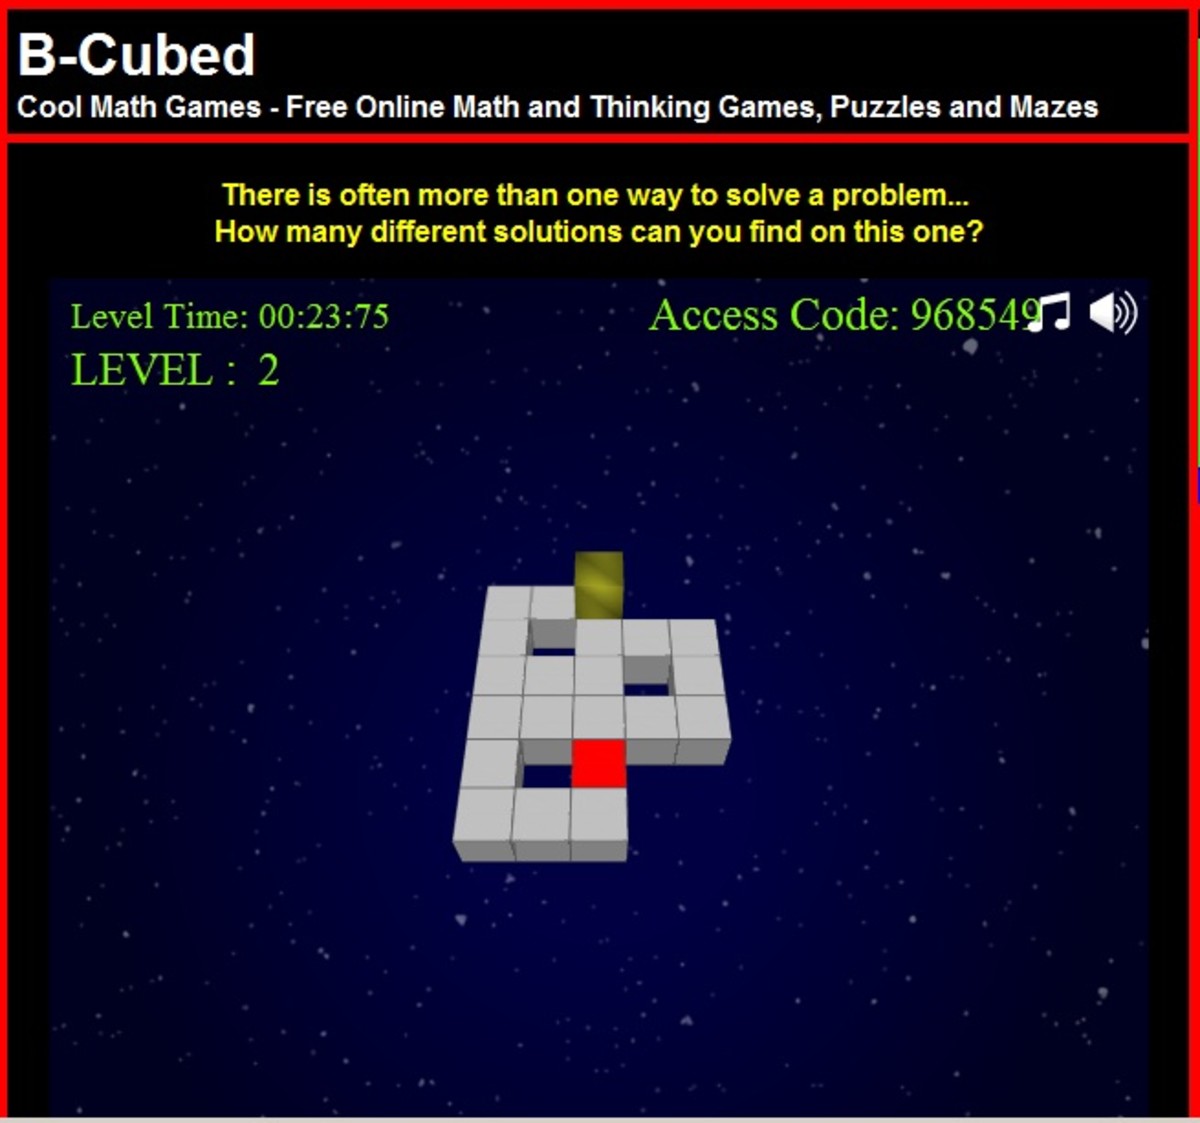 Cool Math Games Site Review HubPages